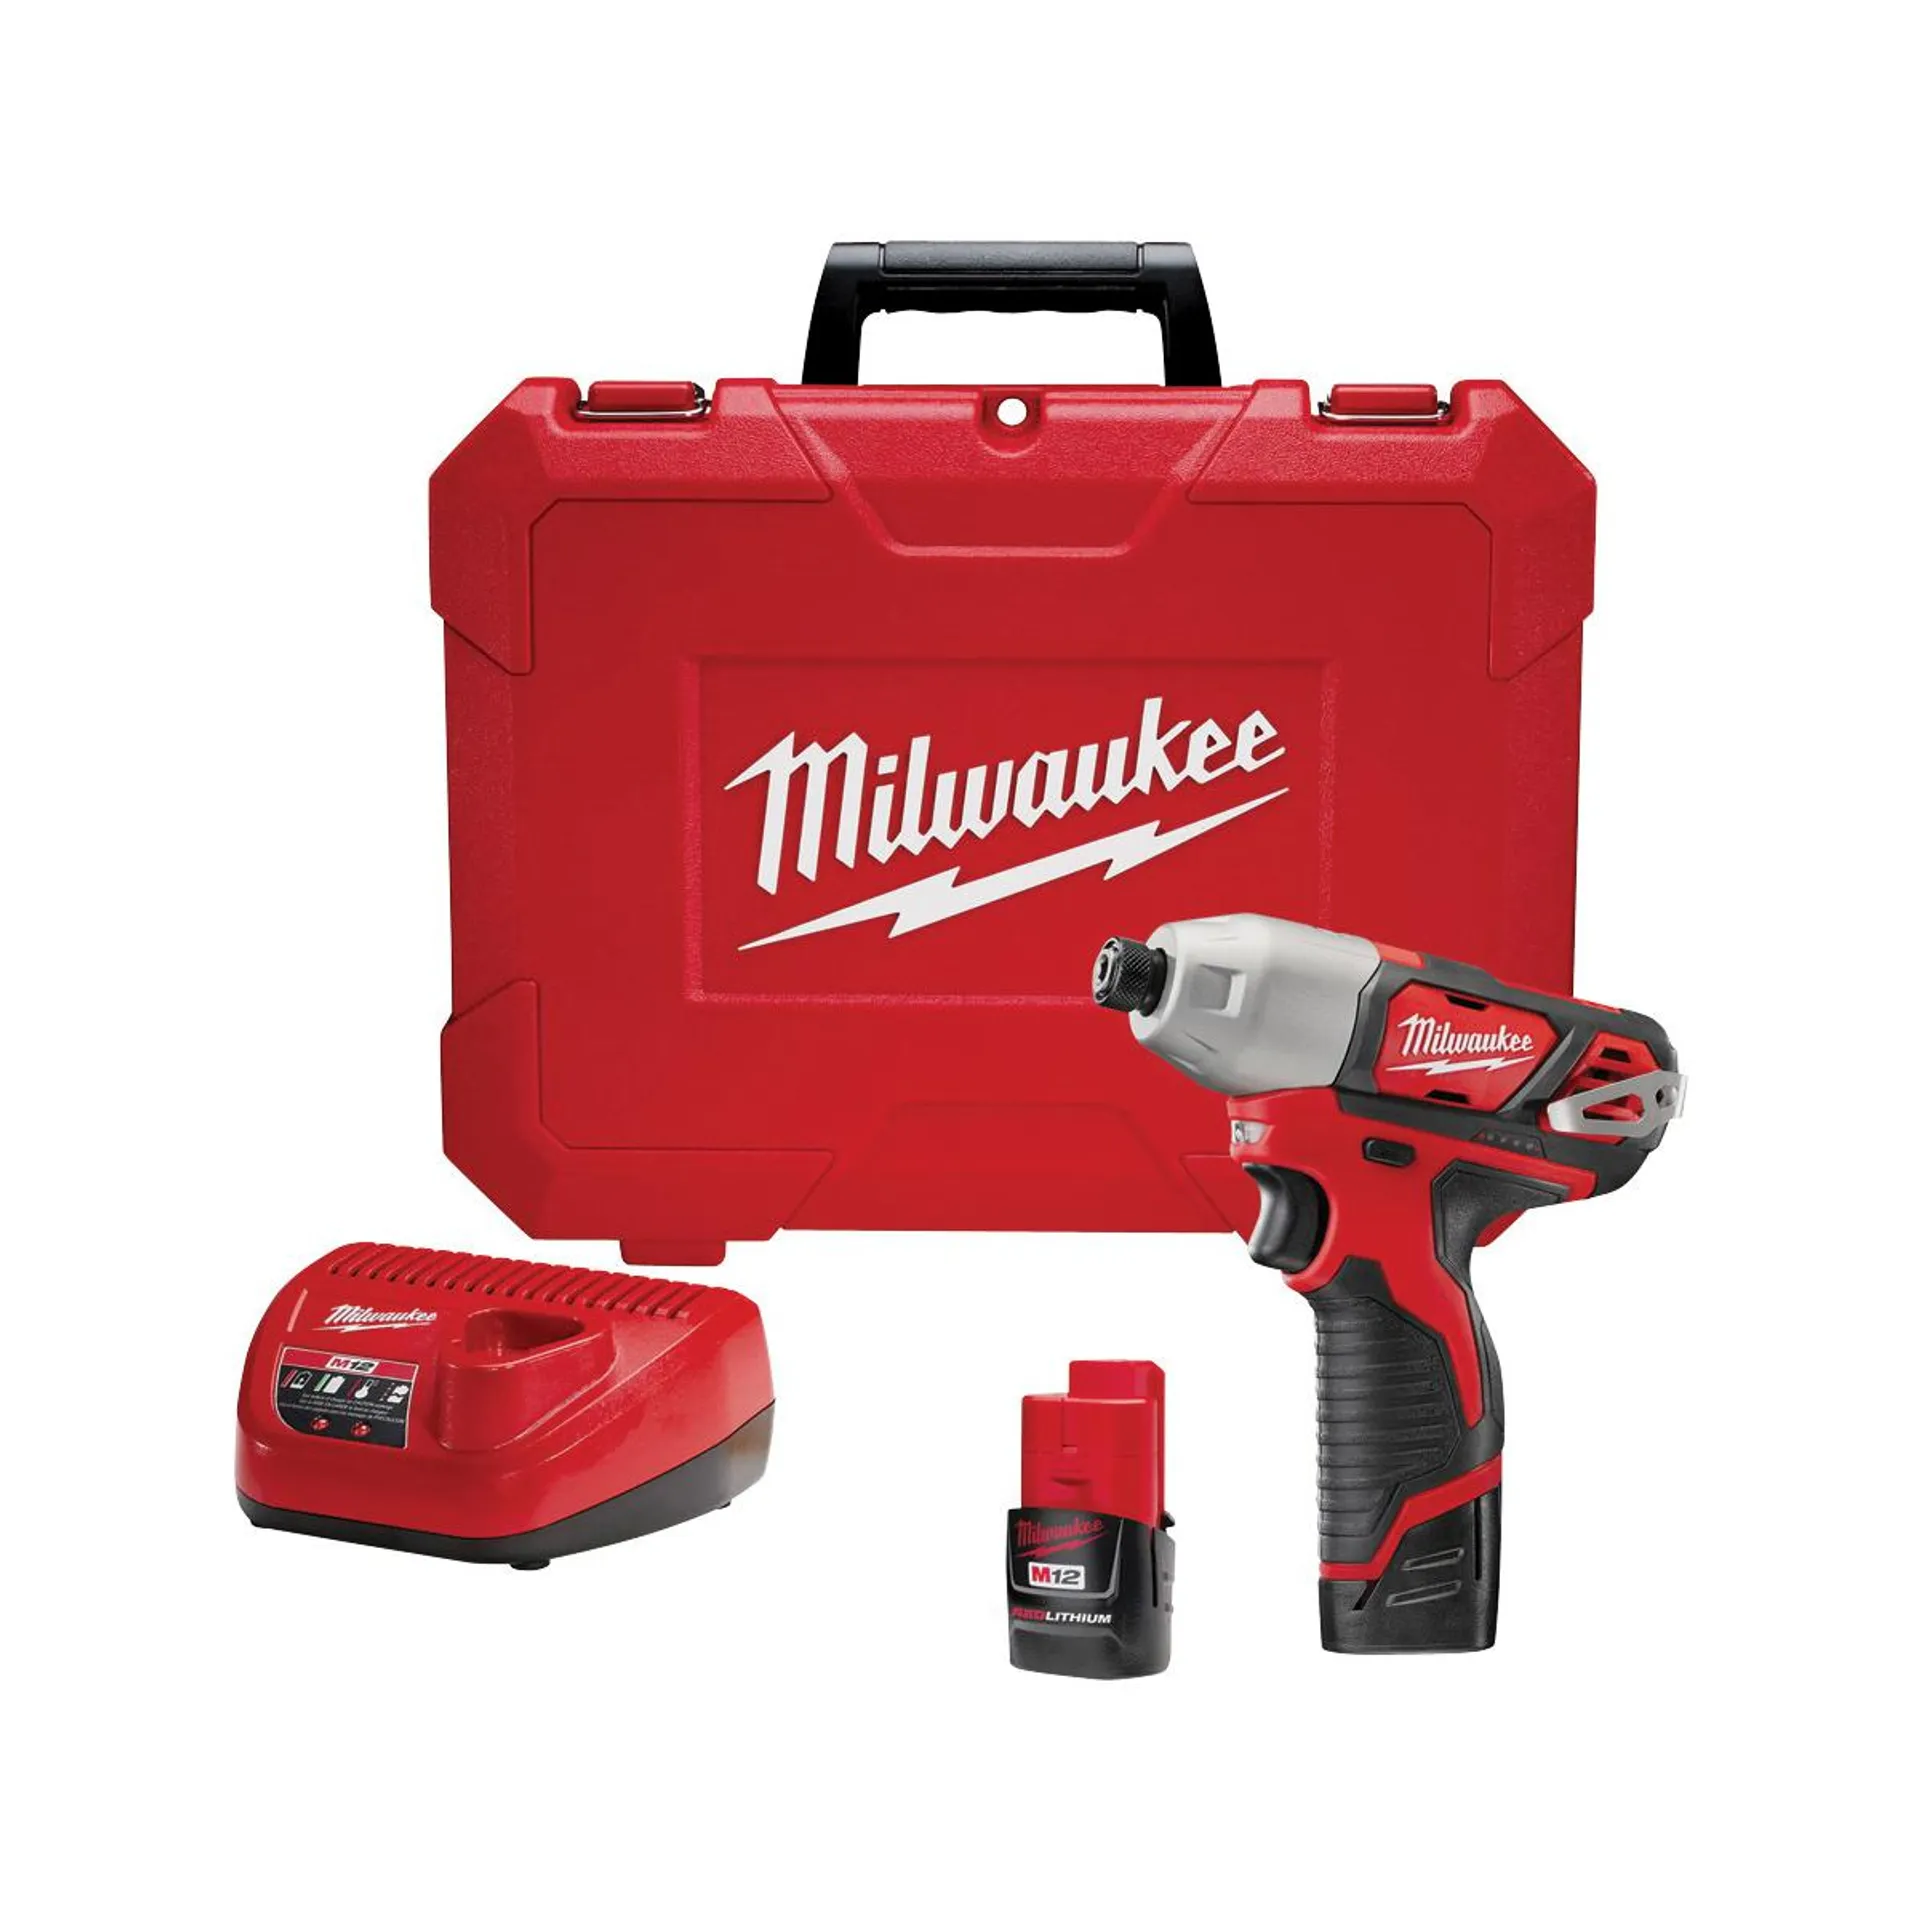 2462-22 Impact Driver Kit, Battery Included, 12 V, 1.5 Ah, 1/4 in Drive, Hex Drive, 3300 ipm